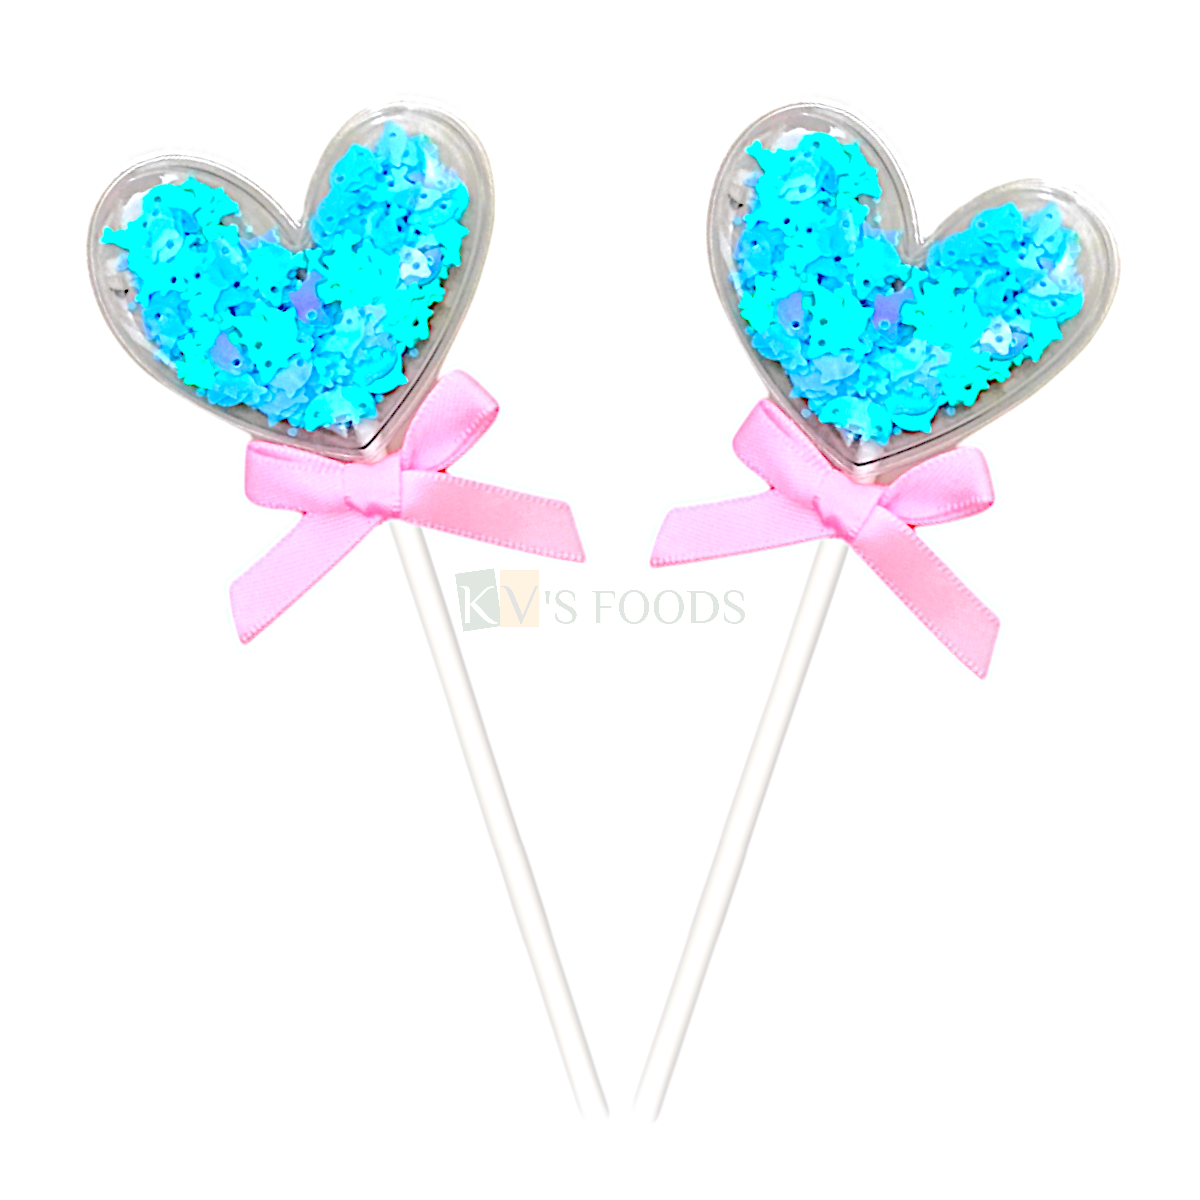 2PC Blue Colour Shiny Fish Shaped Confetti Filled in Transparent Hearts Pink Satin Lace Knot Cake Topper Kids Happy Birthday Cake Insert Anniversary Love Valentine Celebration DIY Cake Decoration